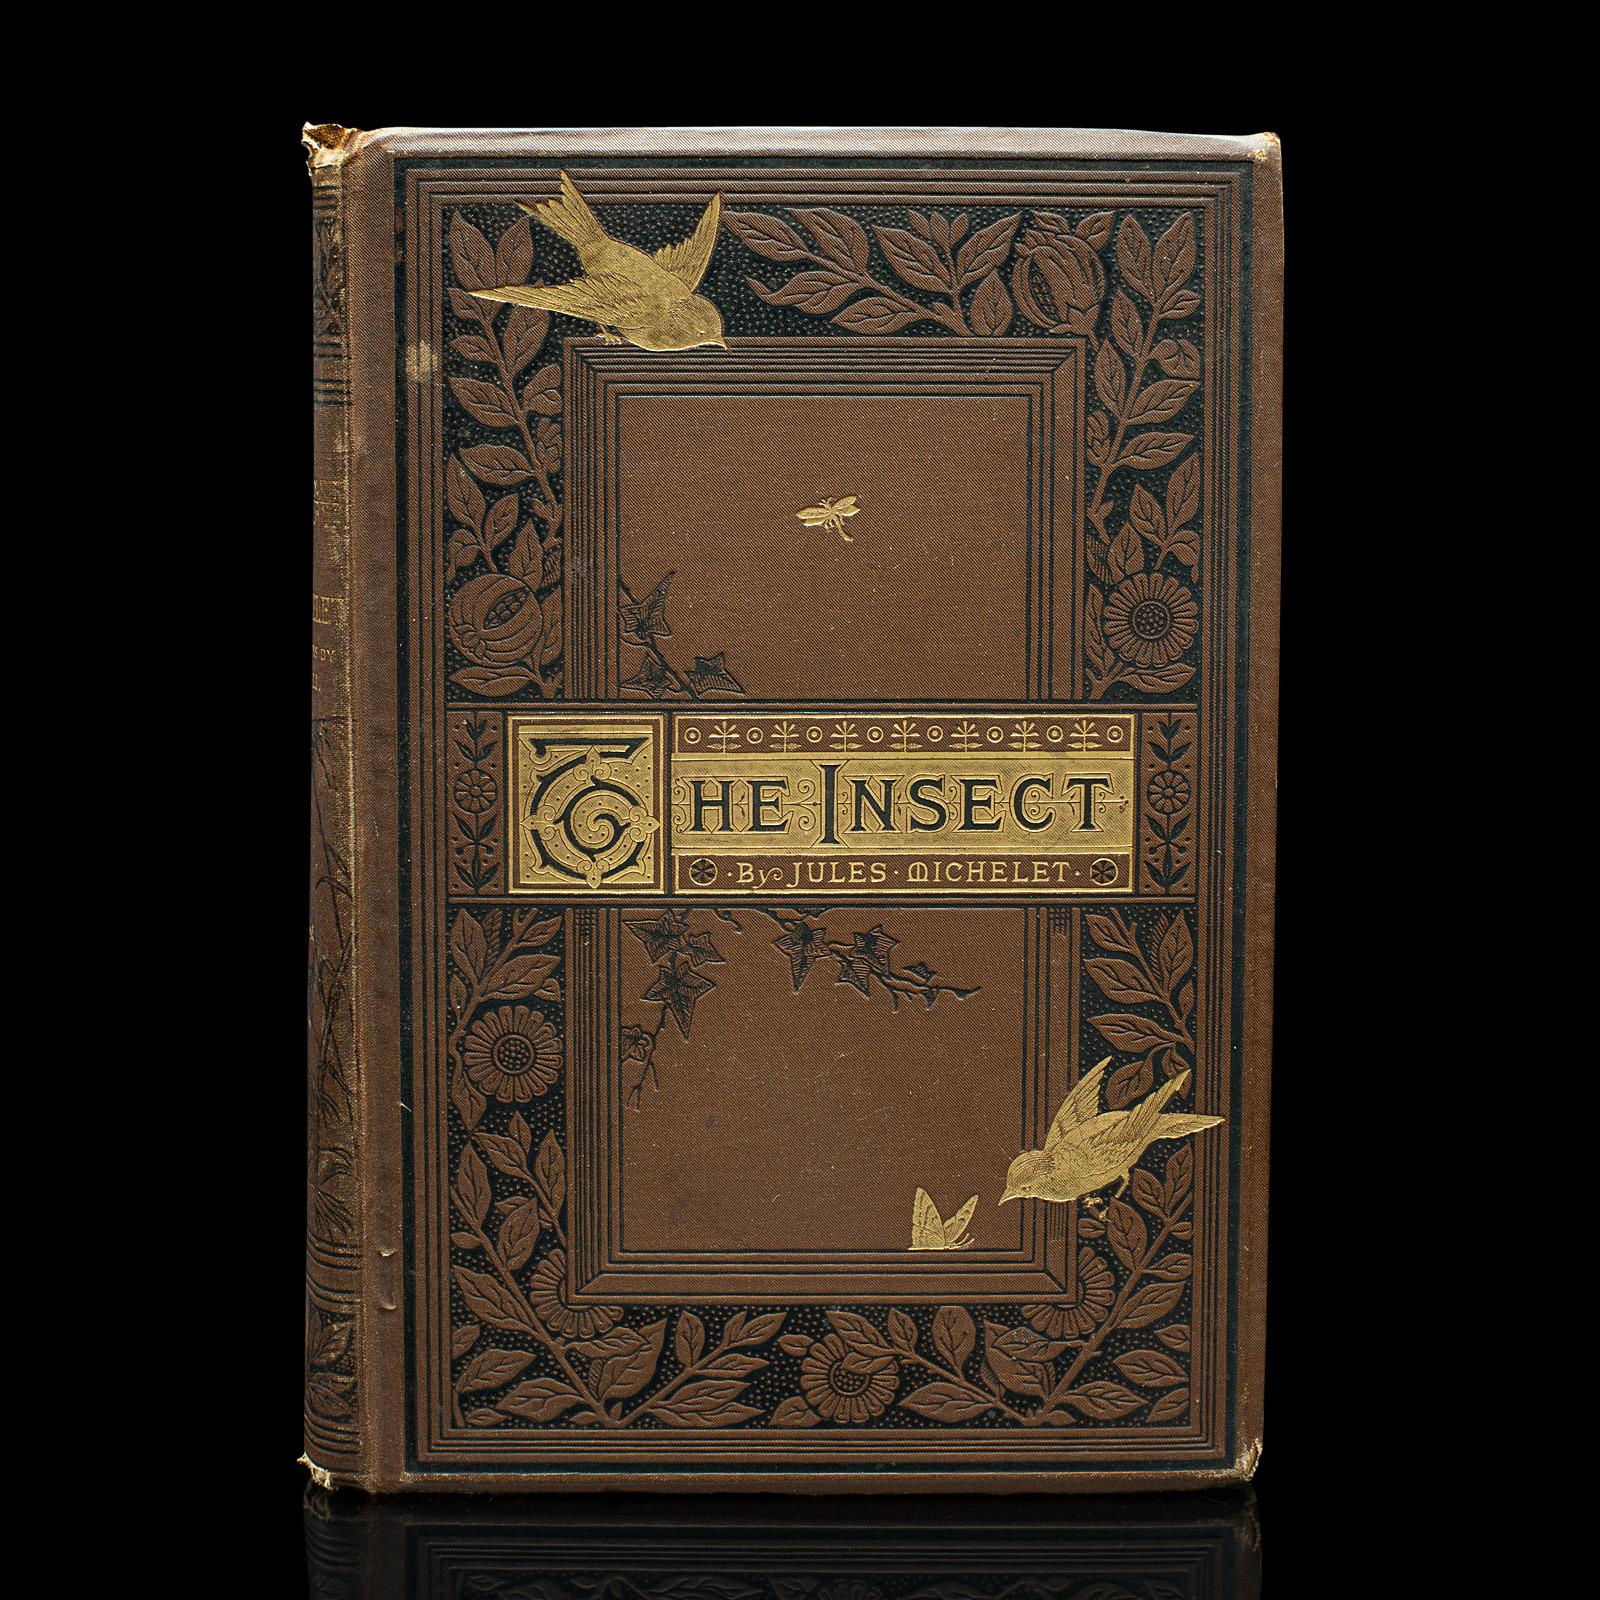 This is an antique copy of The Insect by Jules Michelet. An English language, hard bound study of nature, dating to the Victorian period, this first edition published in 1875.

Published posthumously, The Insect chronicles the natural study of